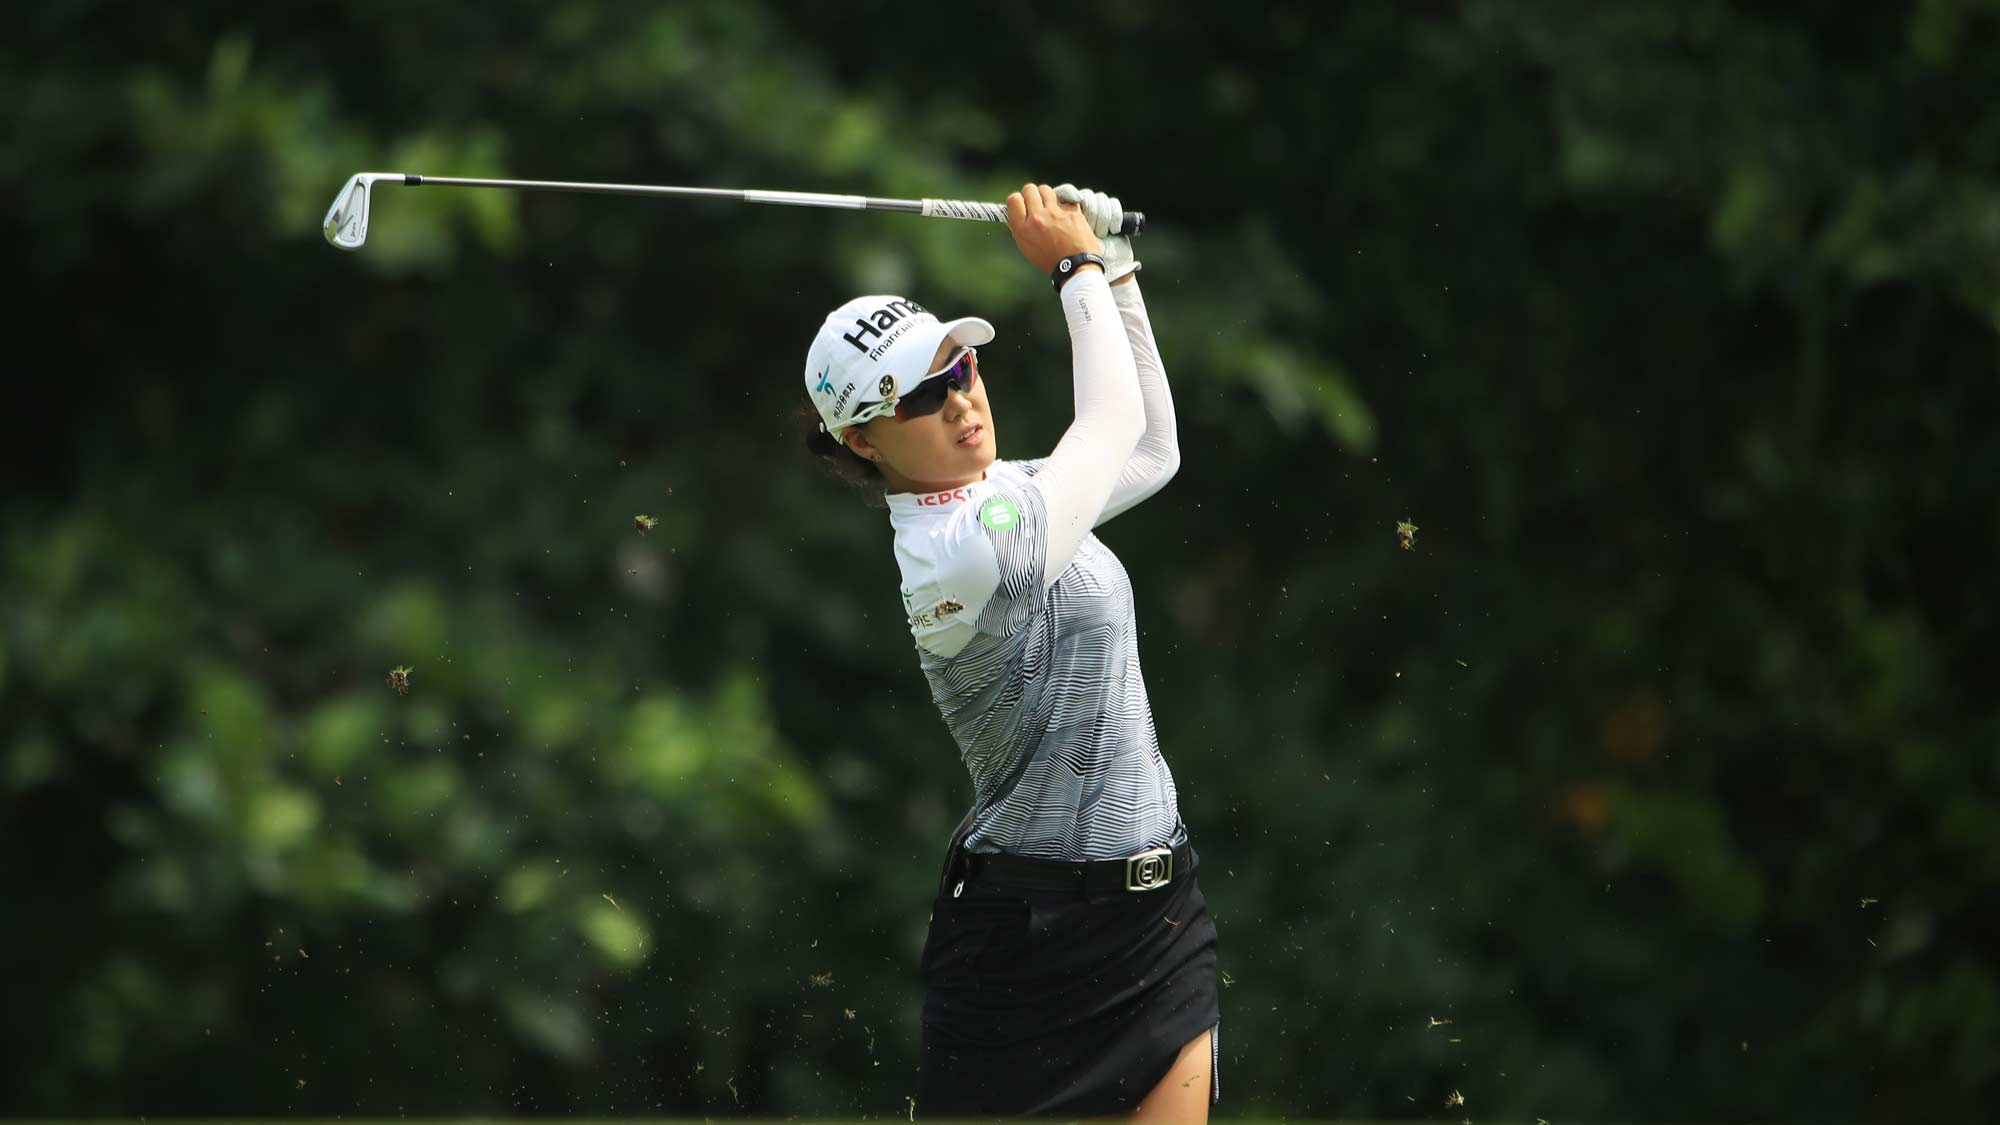 Minjee Lee of Australia plays her second shot on the 18th hole during the first round of the HSBC Women's World Championship at Sentosa Golf Club on February 28, 2019 in Singapore.